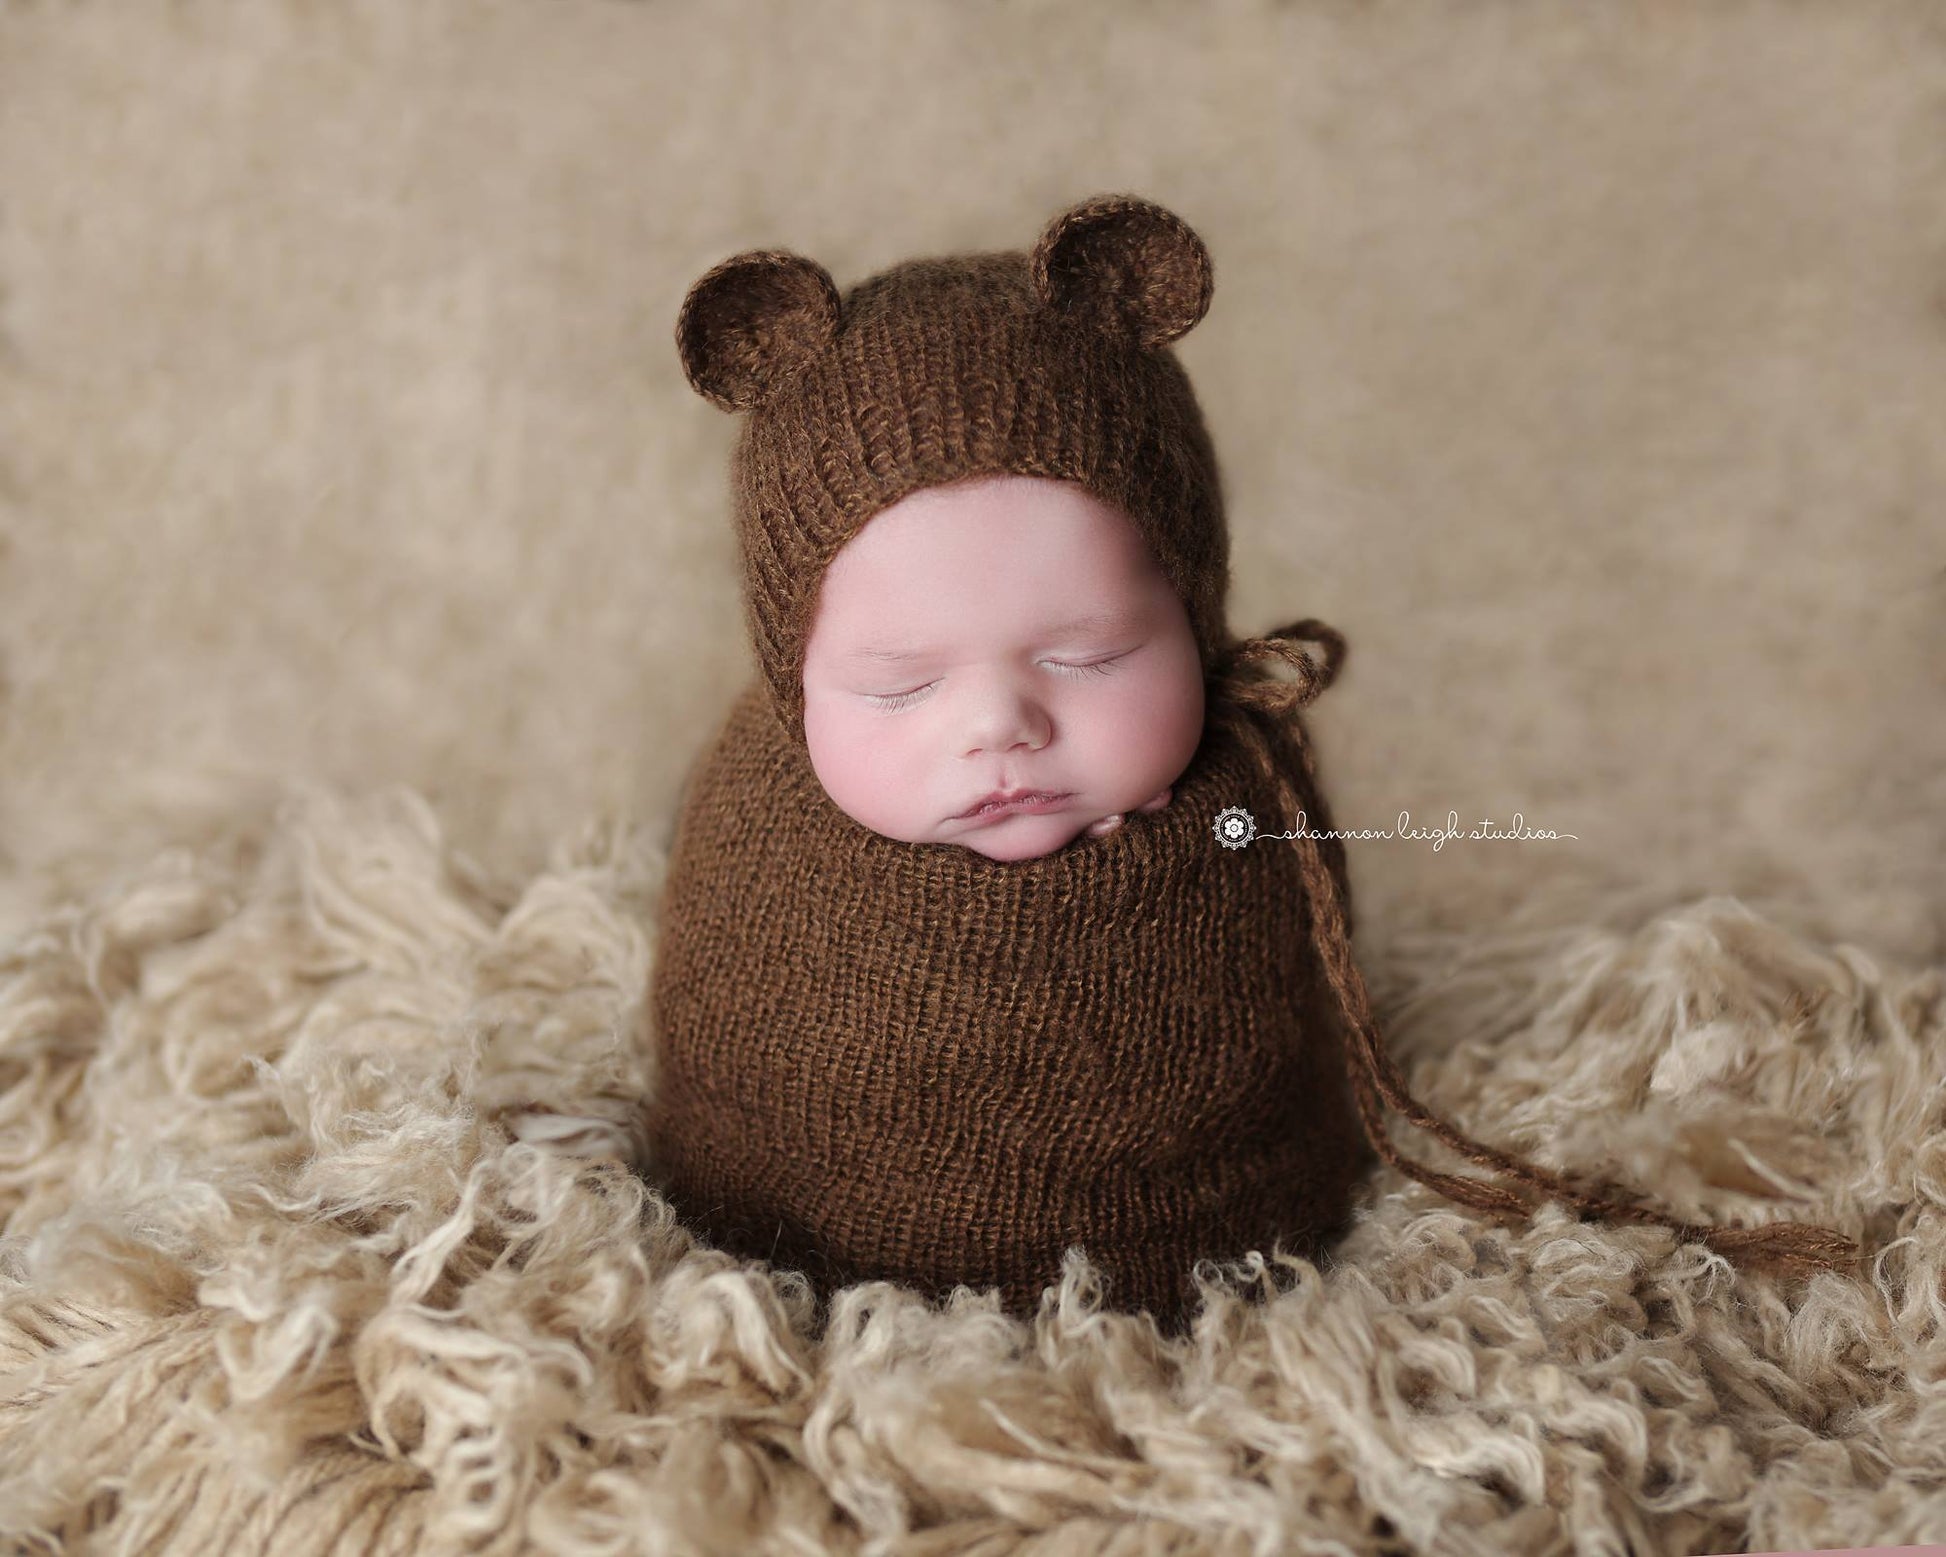 Serene newborn in a beige mohair bear bonnet and sack, resting on a textured cream backdrop, exemplifying a cozy and peaceful newborn photography prop setup.